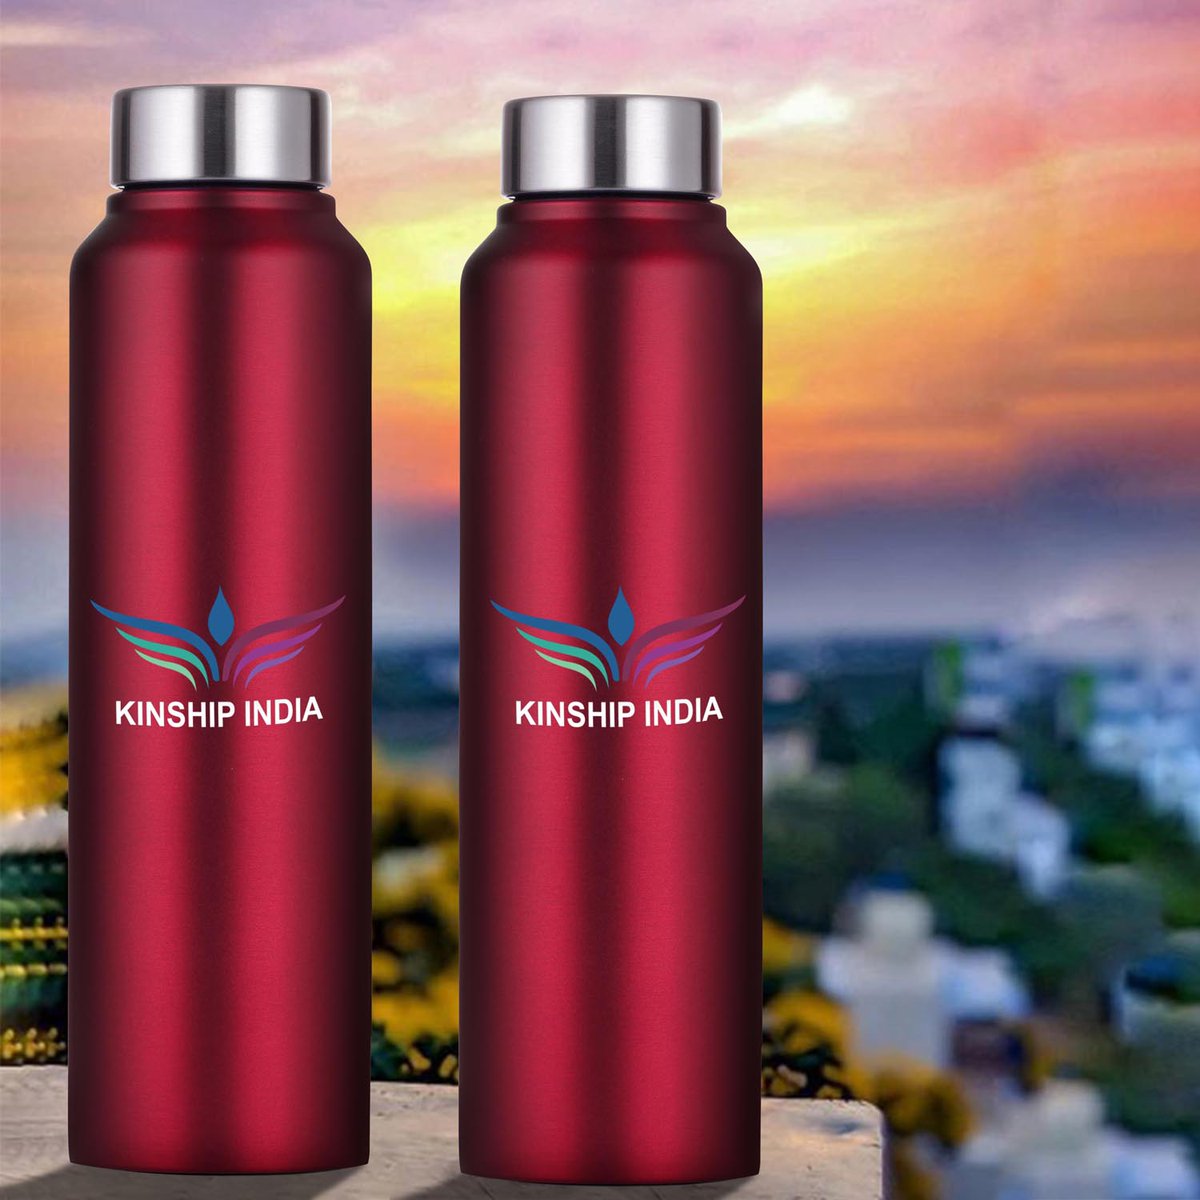 Kinship India Stainless Steel Plain Style Water Bottle Set Of 2(1L).
Kindly Contact For More Information.
#Kinshipindia#Stainless#Steel#Kitchenproducts#Stayhydrted#Hydration#Waterislife#Waterbottle#Twitter#Mypageontwitter#Bottles#Best#Manufacturer#Delhi#India